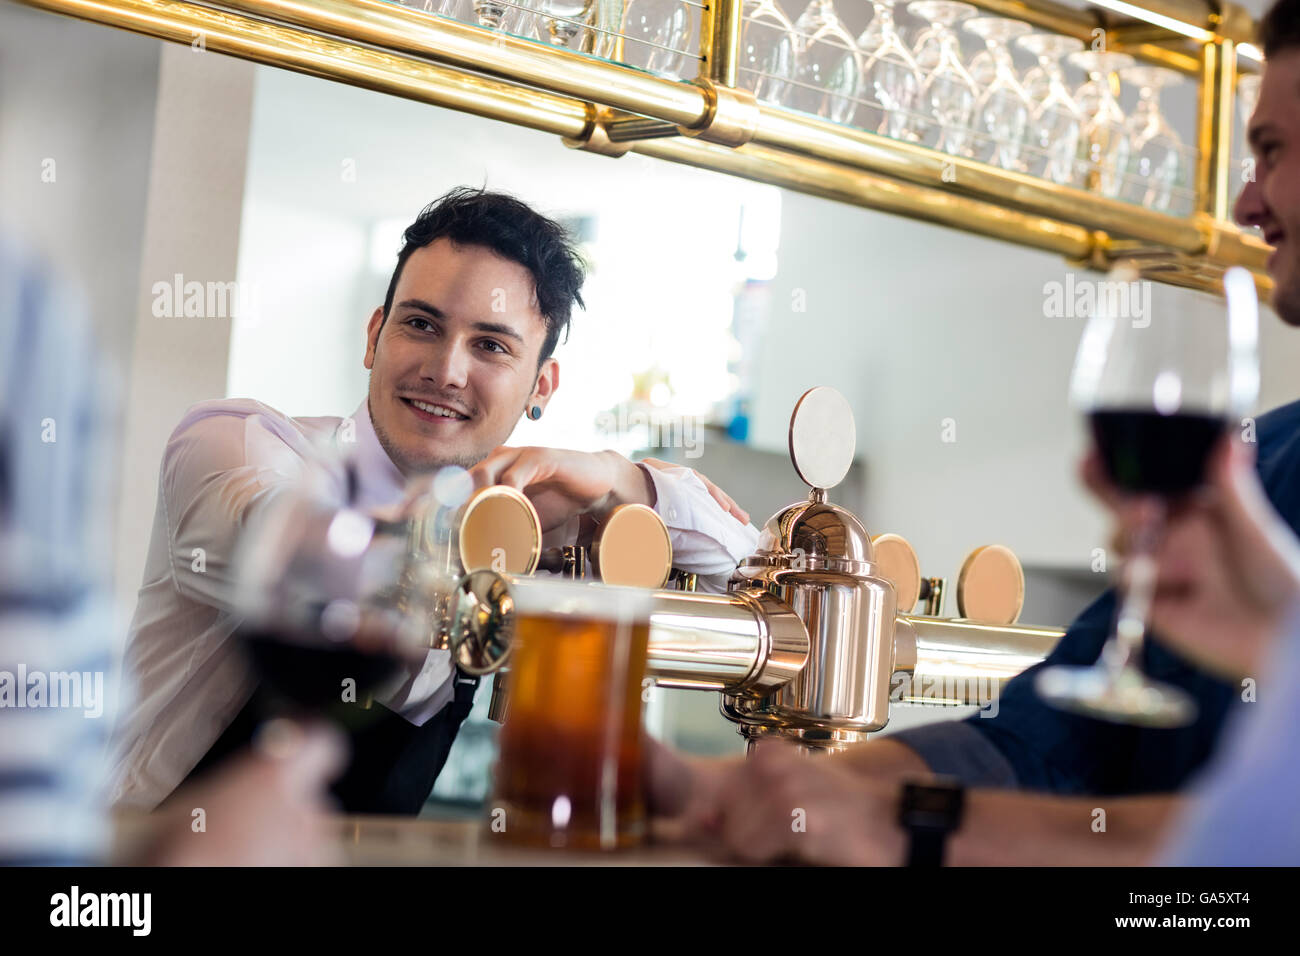 Bartender talking with customers counter Stock Photo